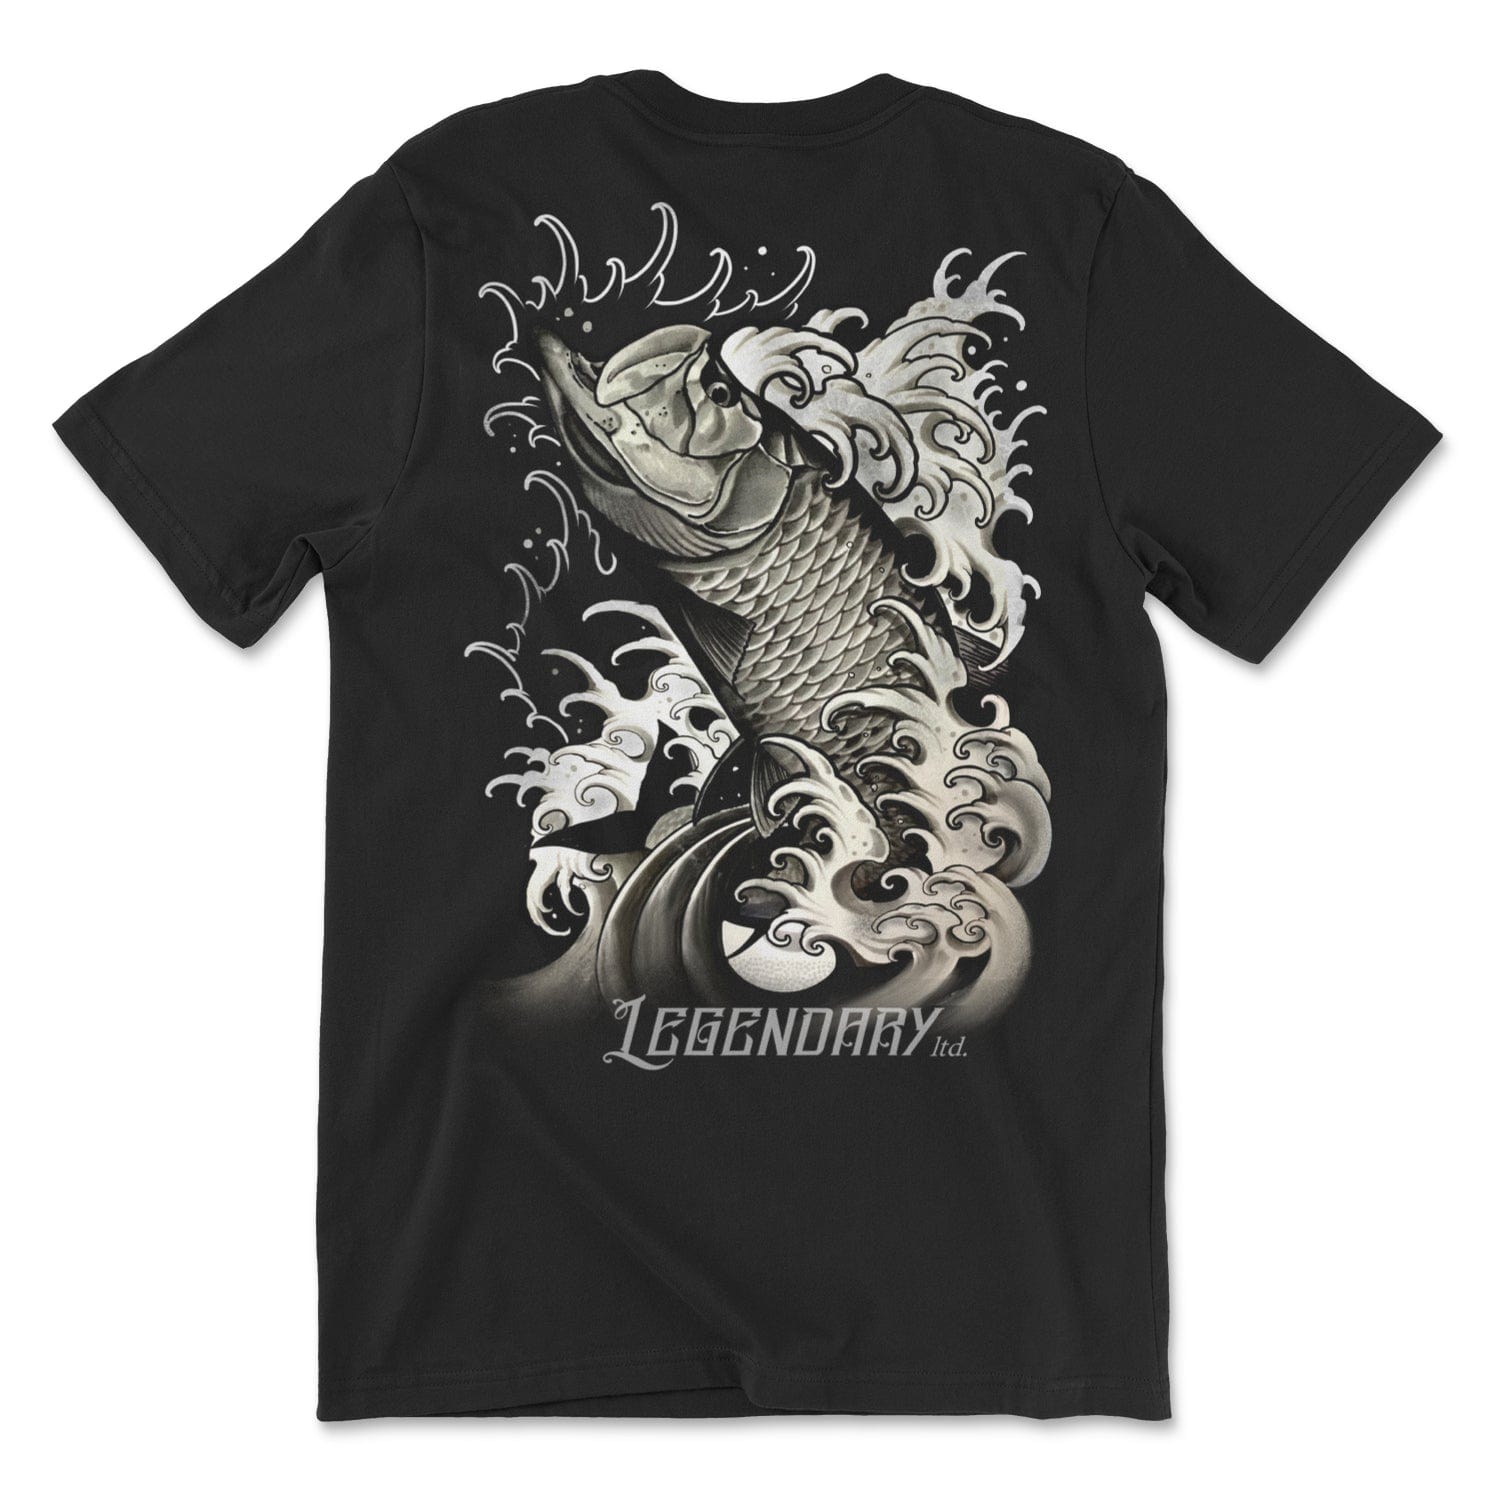 Fishing T Shirts - Men Graphics Tees - T Shirts with Graphics S